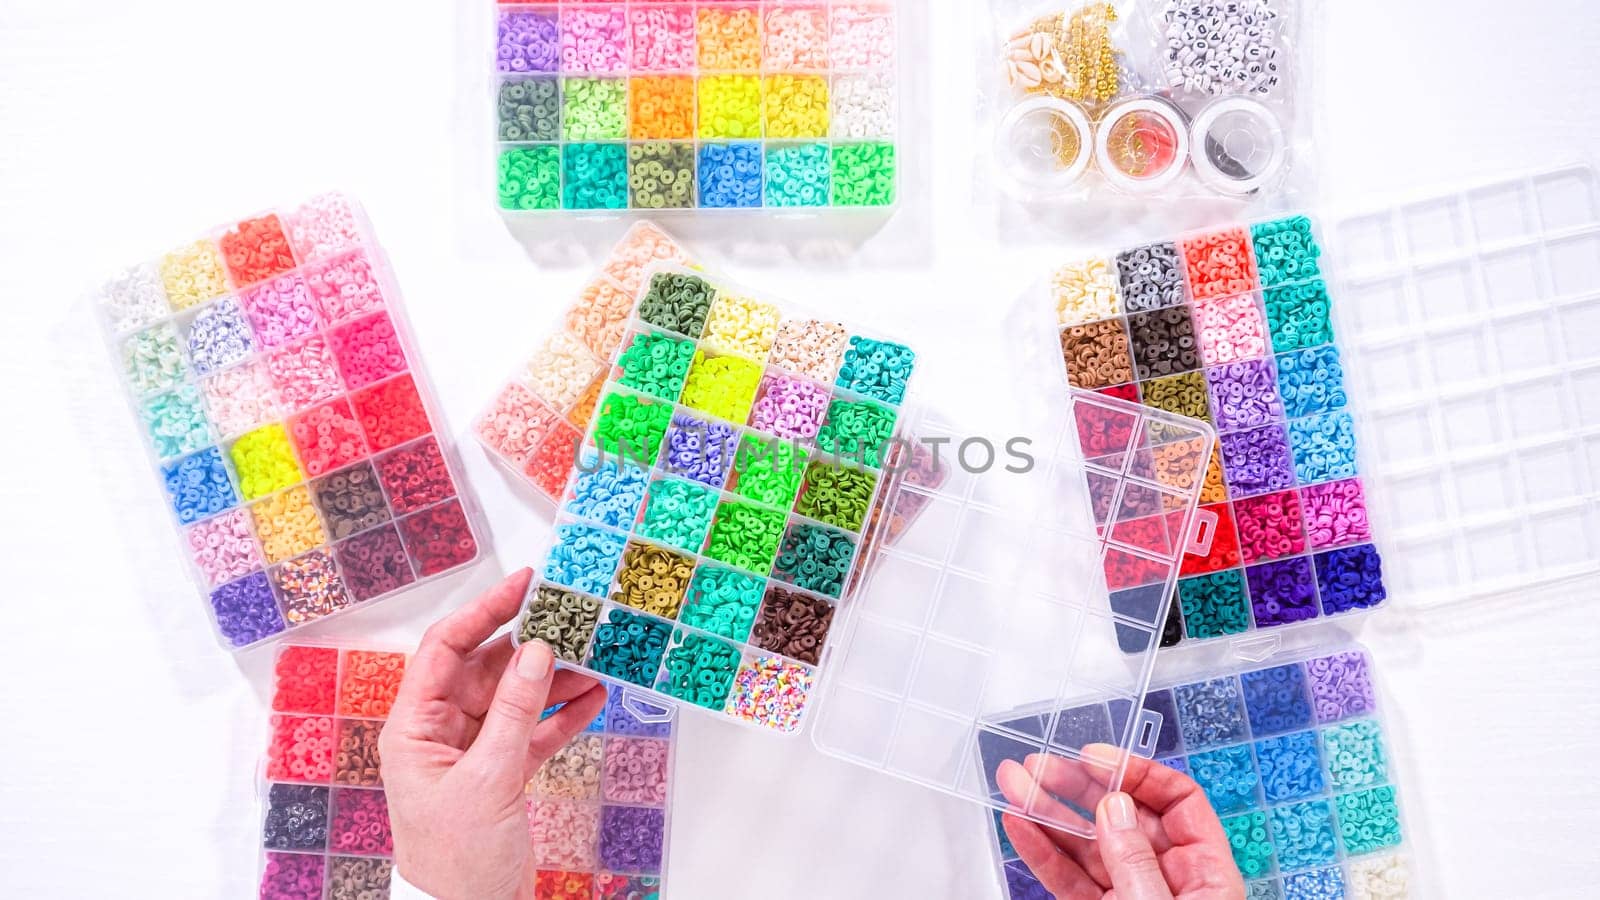 Flat lay. Woman’s hands gracefully poised over a collection of beads, sorted by color in transparent organizers. The array of beads spans a vibrant spectrum, from deep purples to bright oranges, meticulously arranged for easy selection as she embarks on creating a custom piece of jewelry.